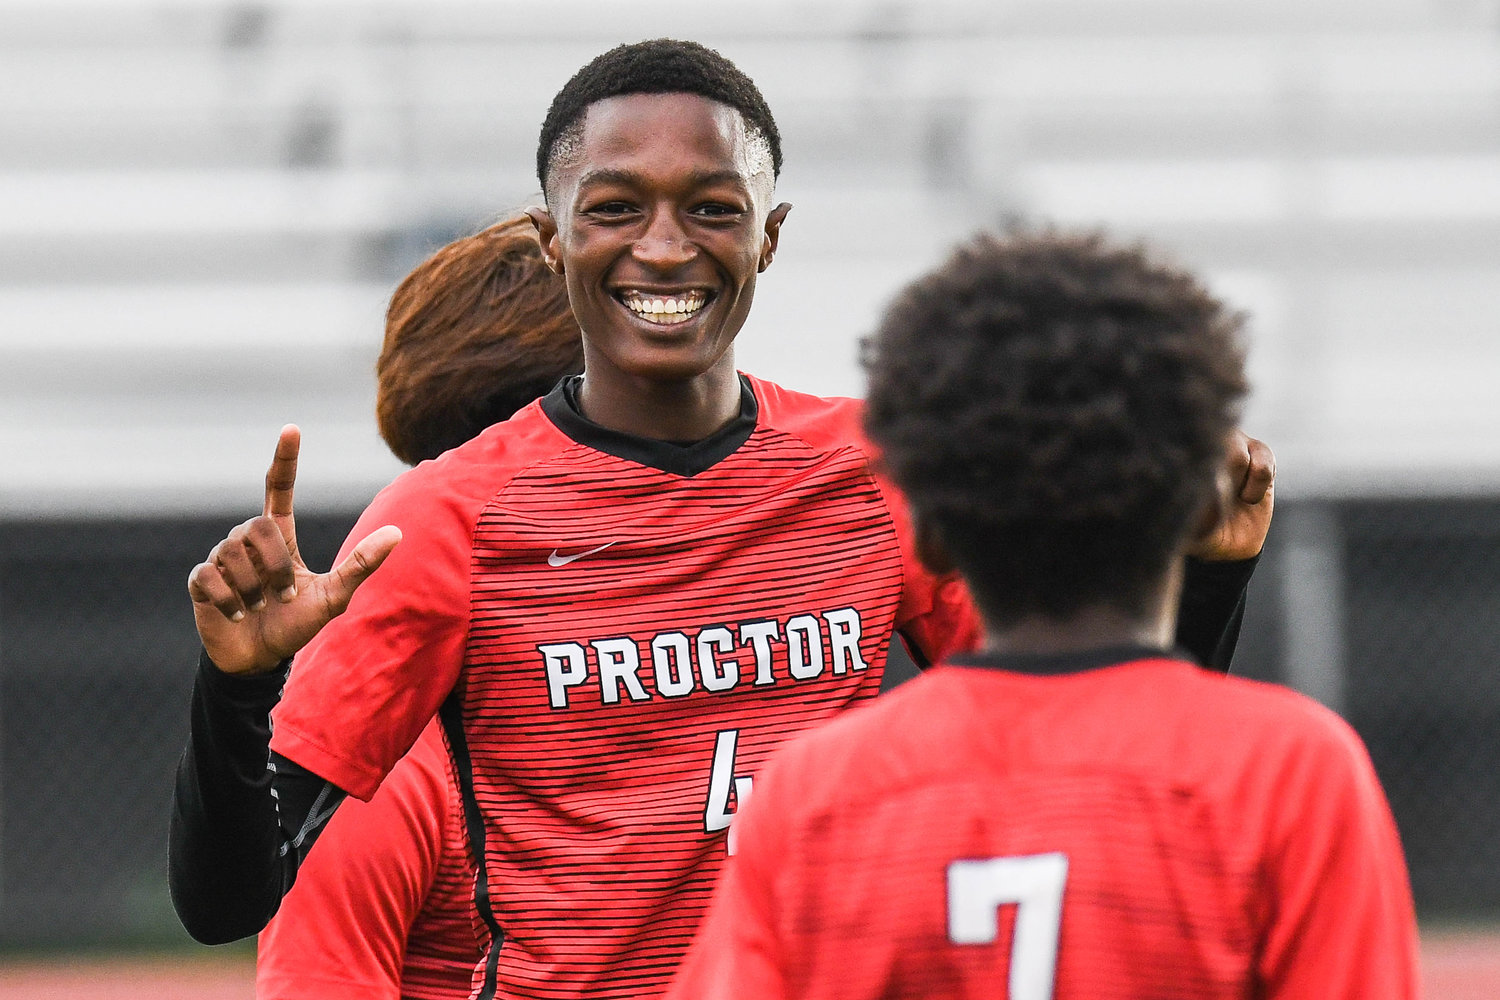 Proctor player Hussein Awo (4) celebrates with teammate Siidahmed Somow (7) after scoring a goal during the soccer game against VVS on Tuesday.